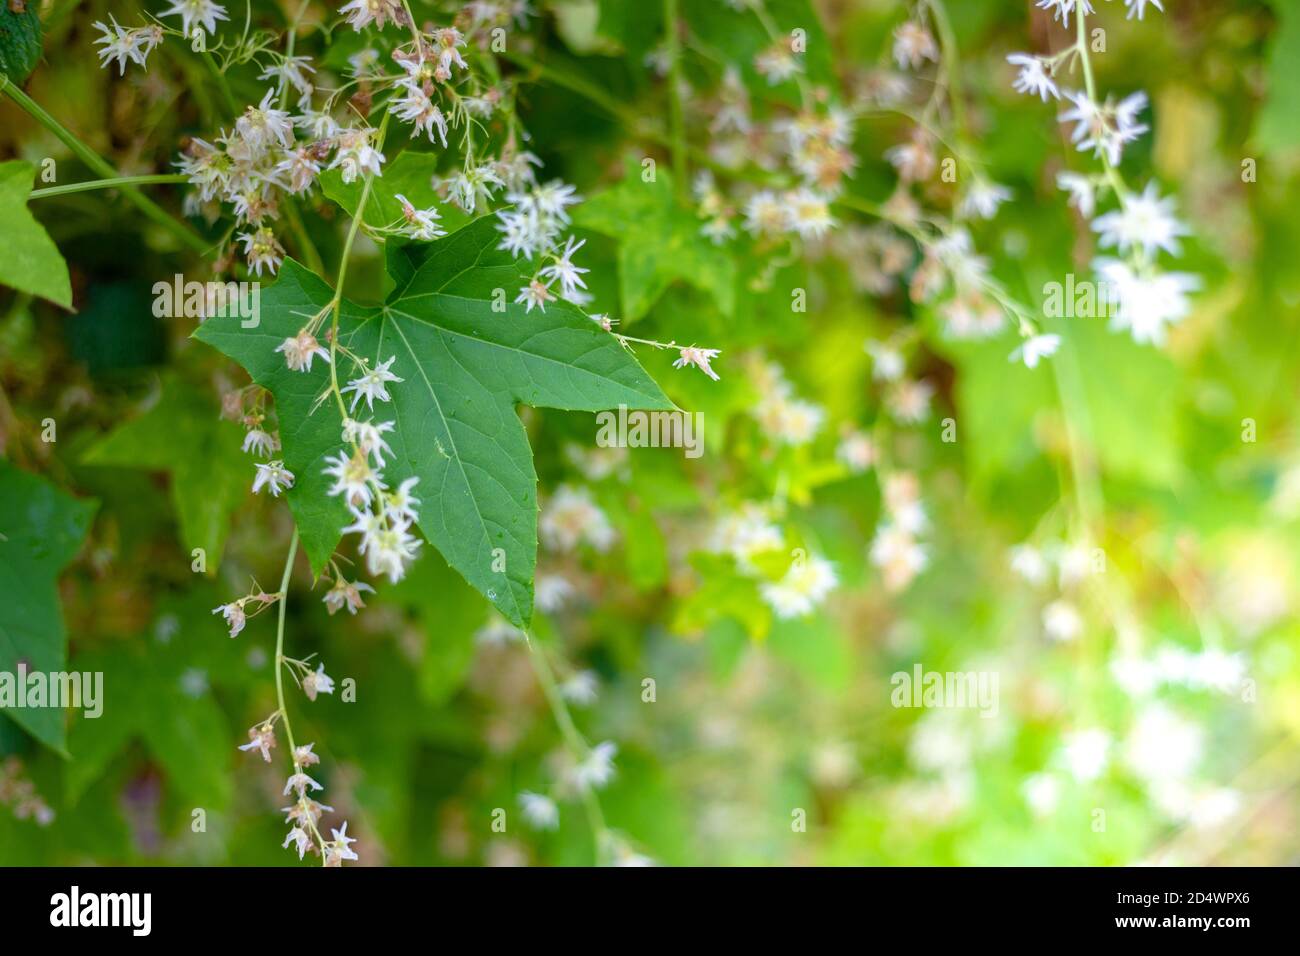 Green leaves and white hop flowers Stock Photo